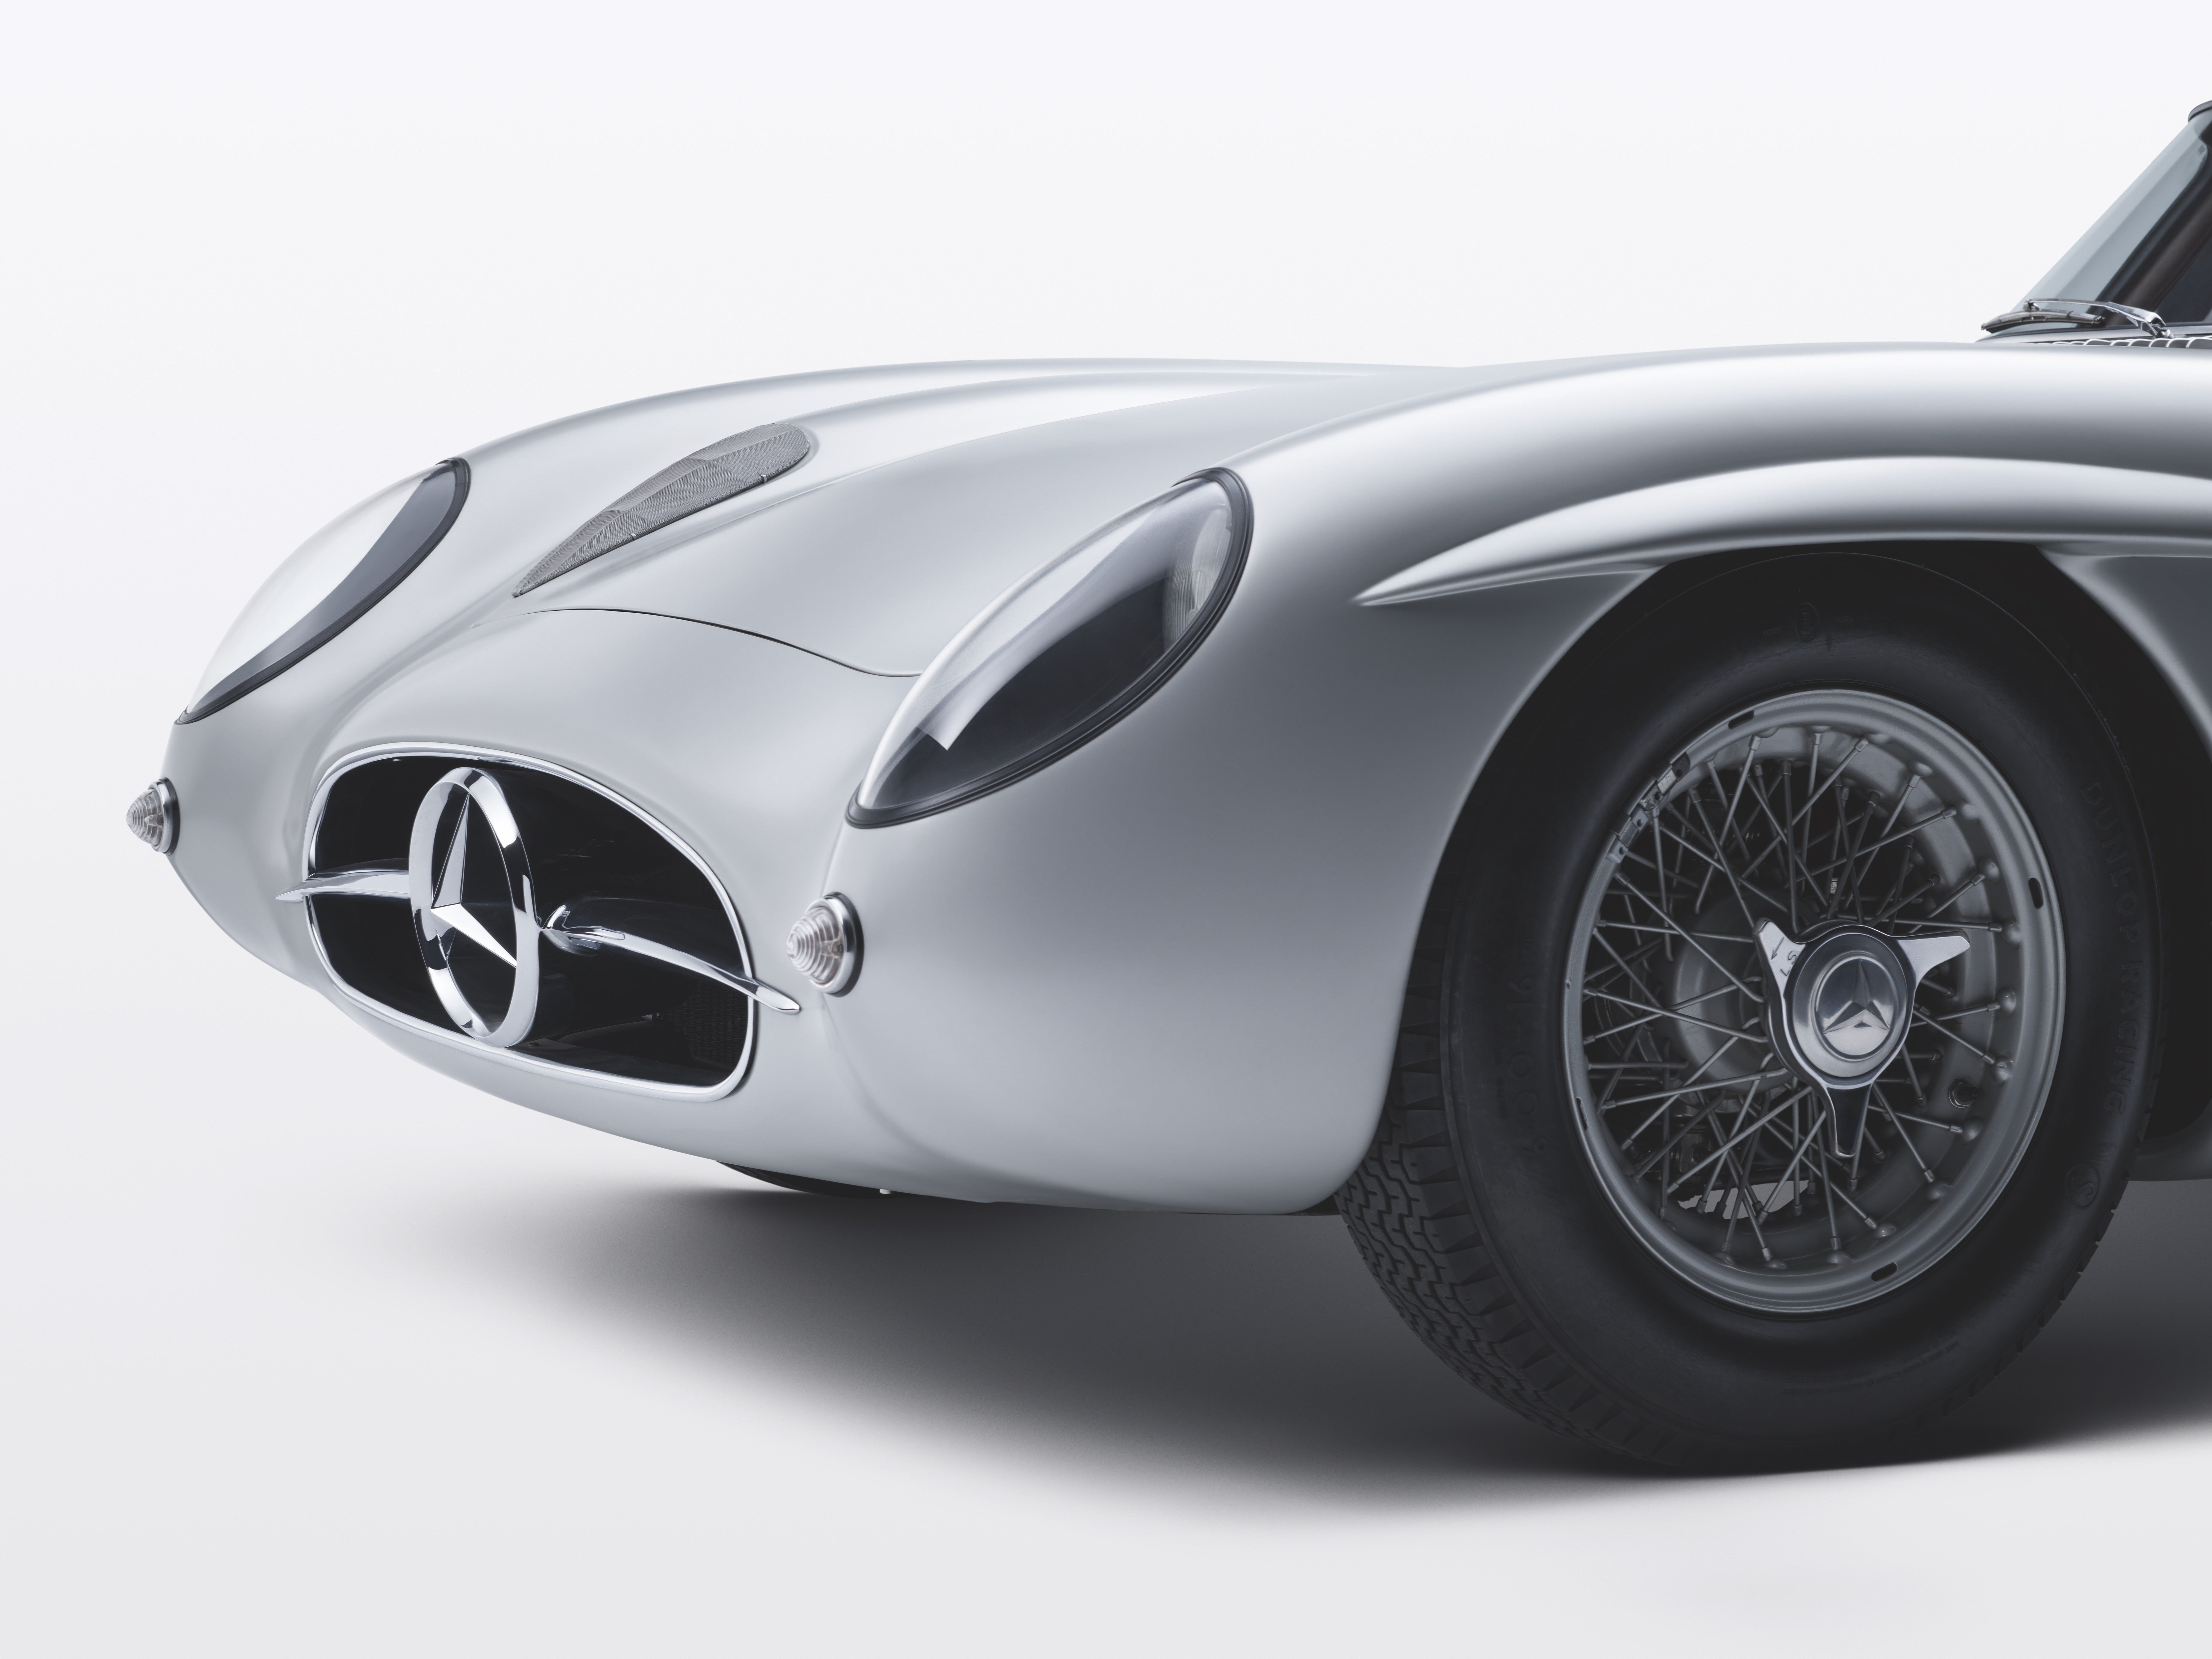 This Mercedes Is Officially the Most Expensive Car Ever Sold at $202 Million